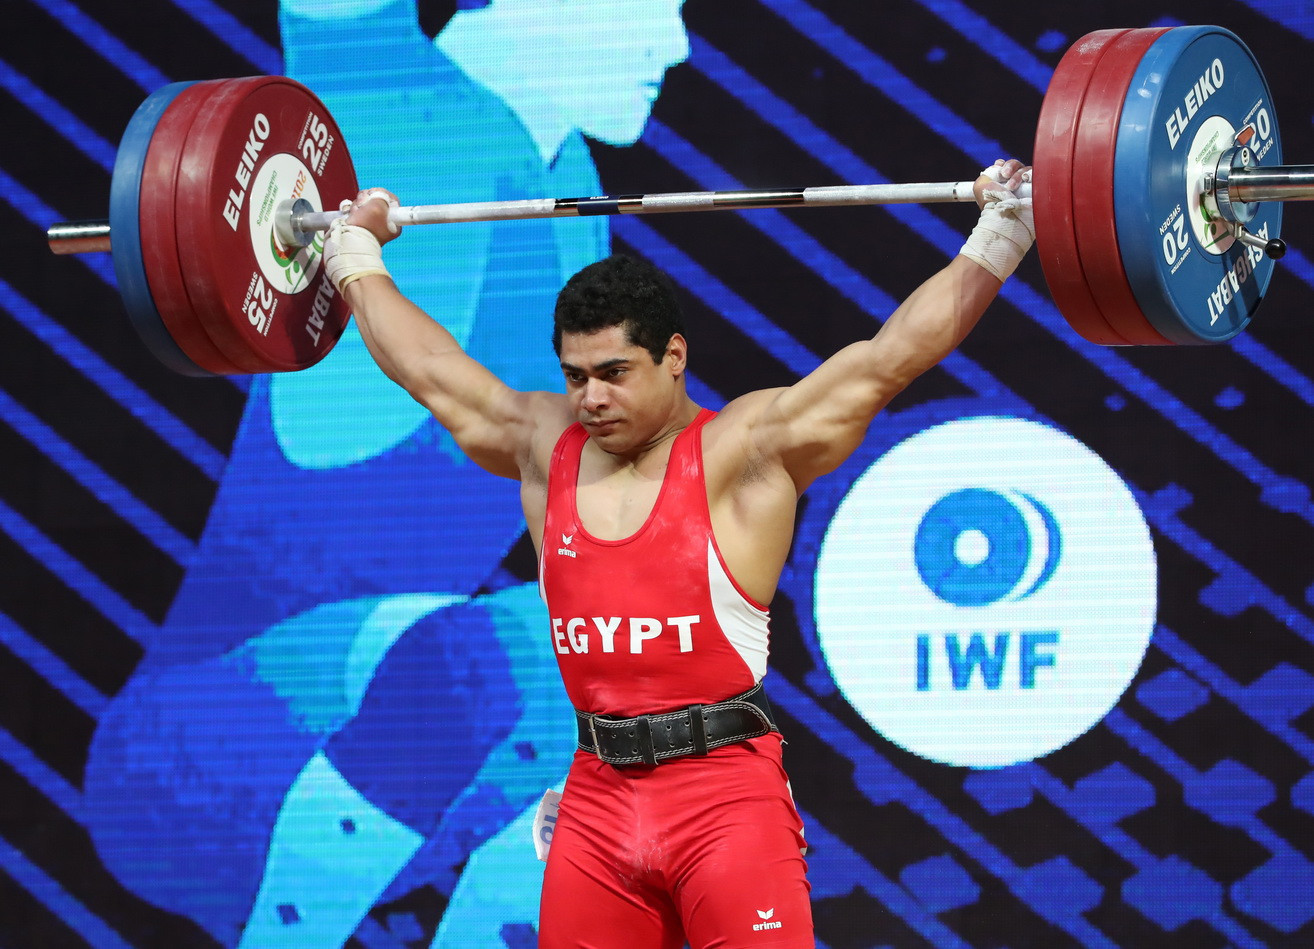 He was followed in the standings by Egypt’s Mohamed Ihab Youssef Ahmed Mahmoud with 373kg ©IWF